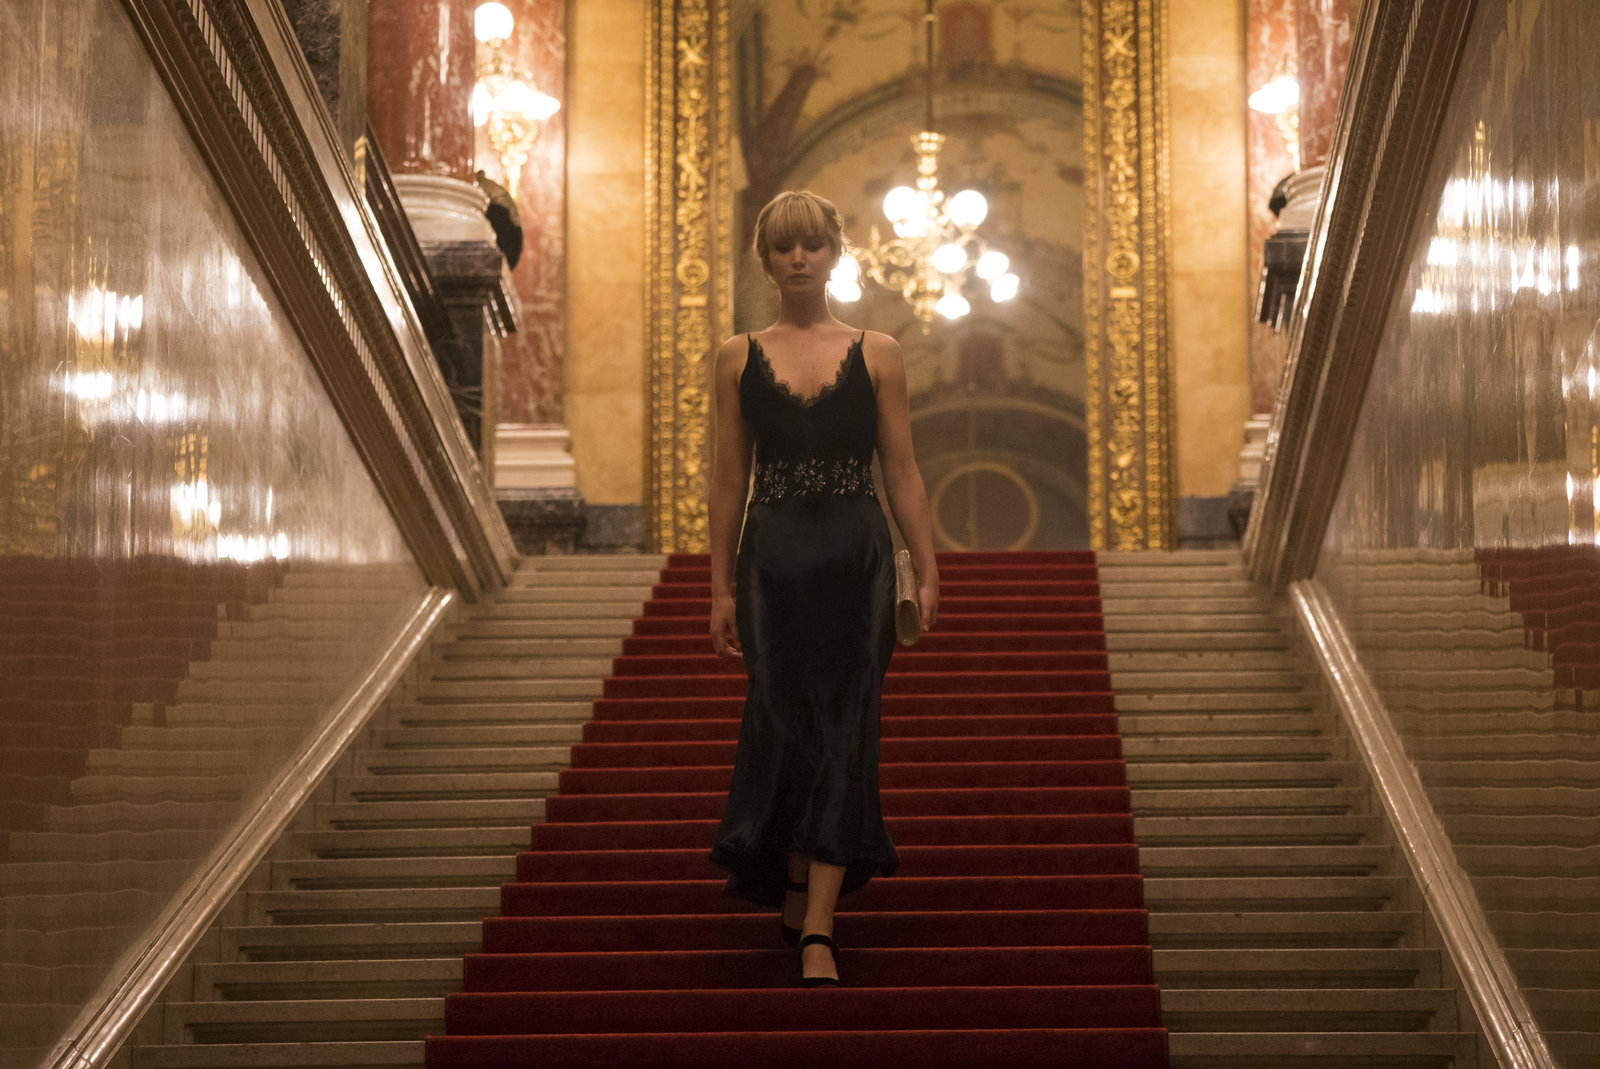 Red Sparrow (4K Ultra HD)